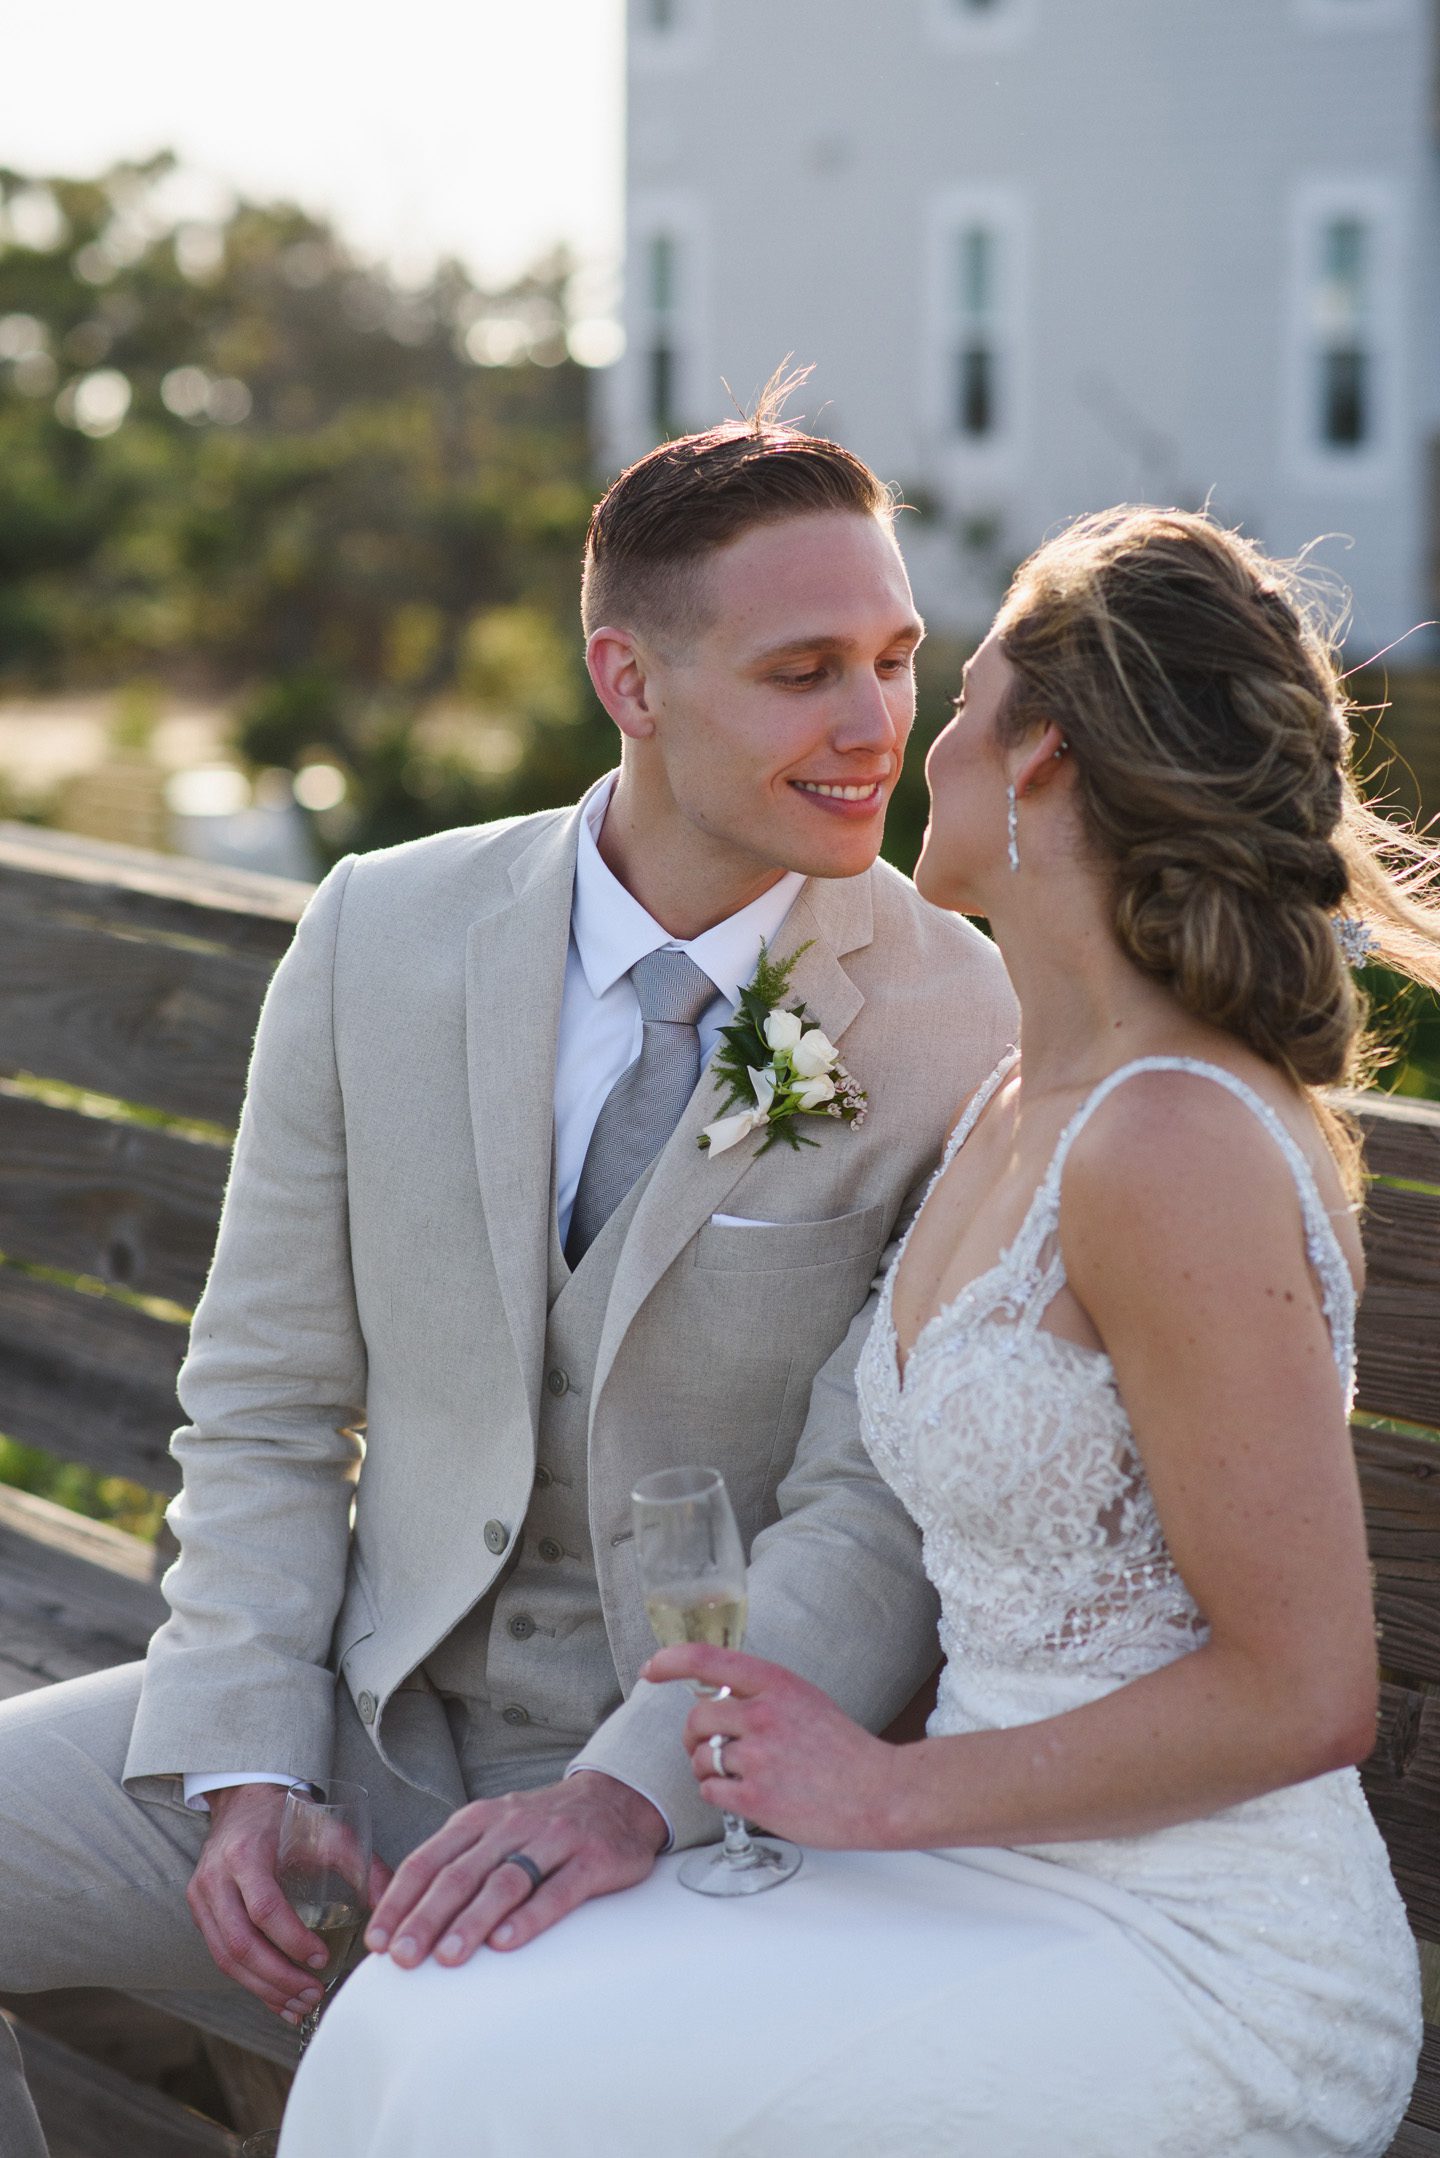 Outer Banks Wedding Photographers Neil GT Photography Palmers Island Beach Elopement Champagne Toast Kiss